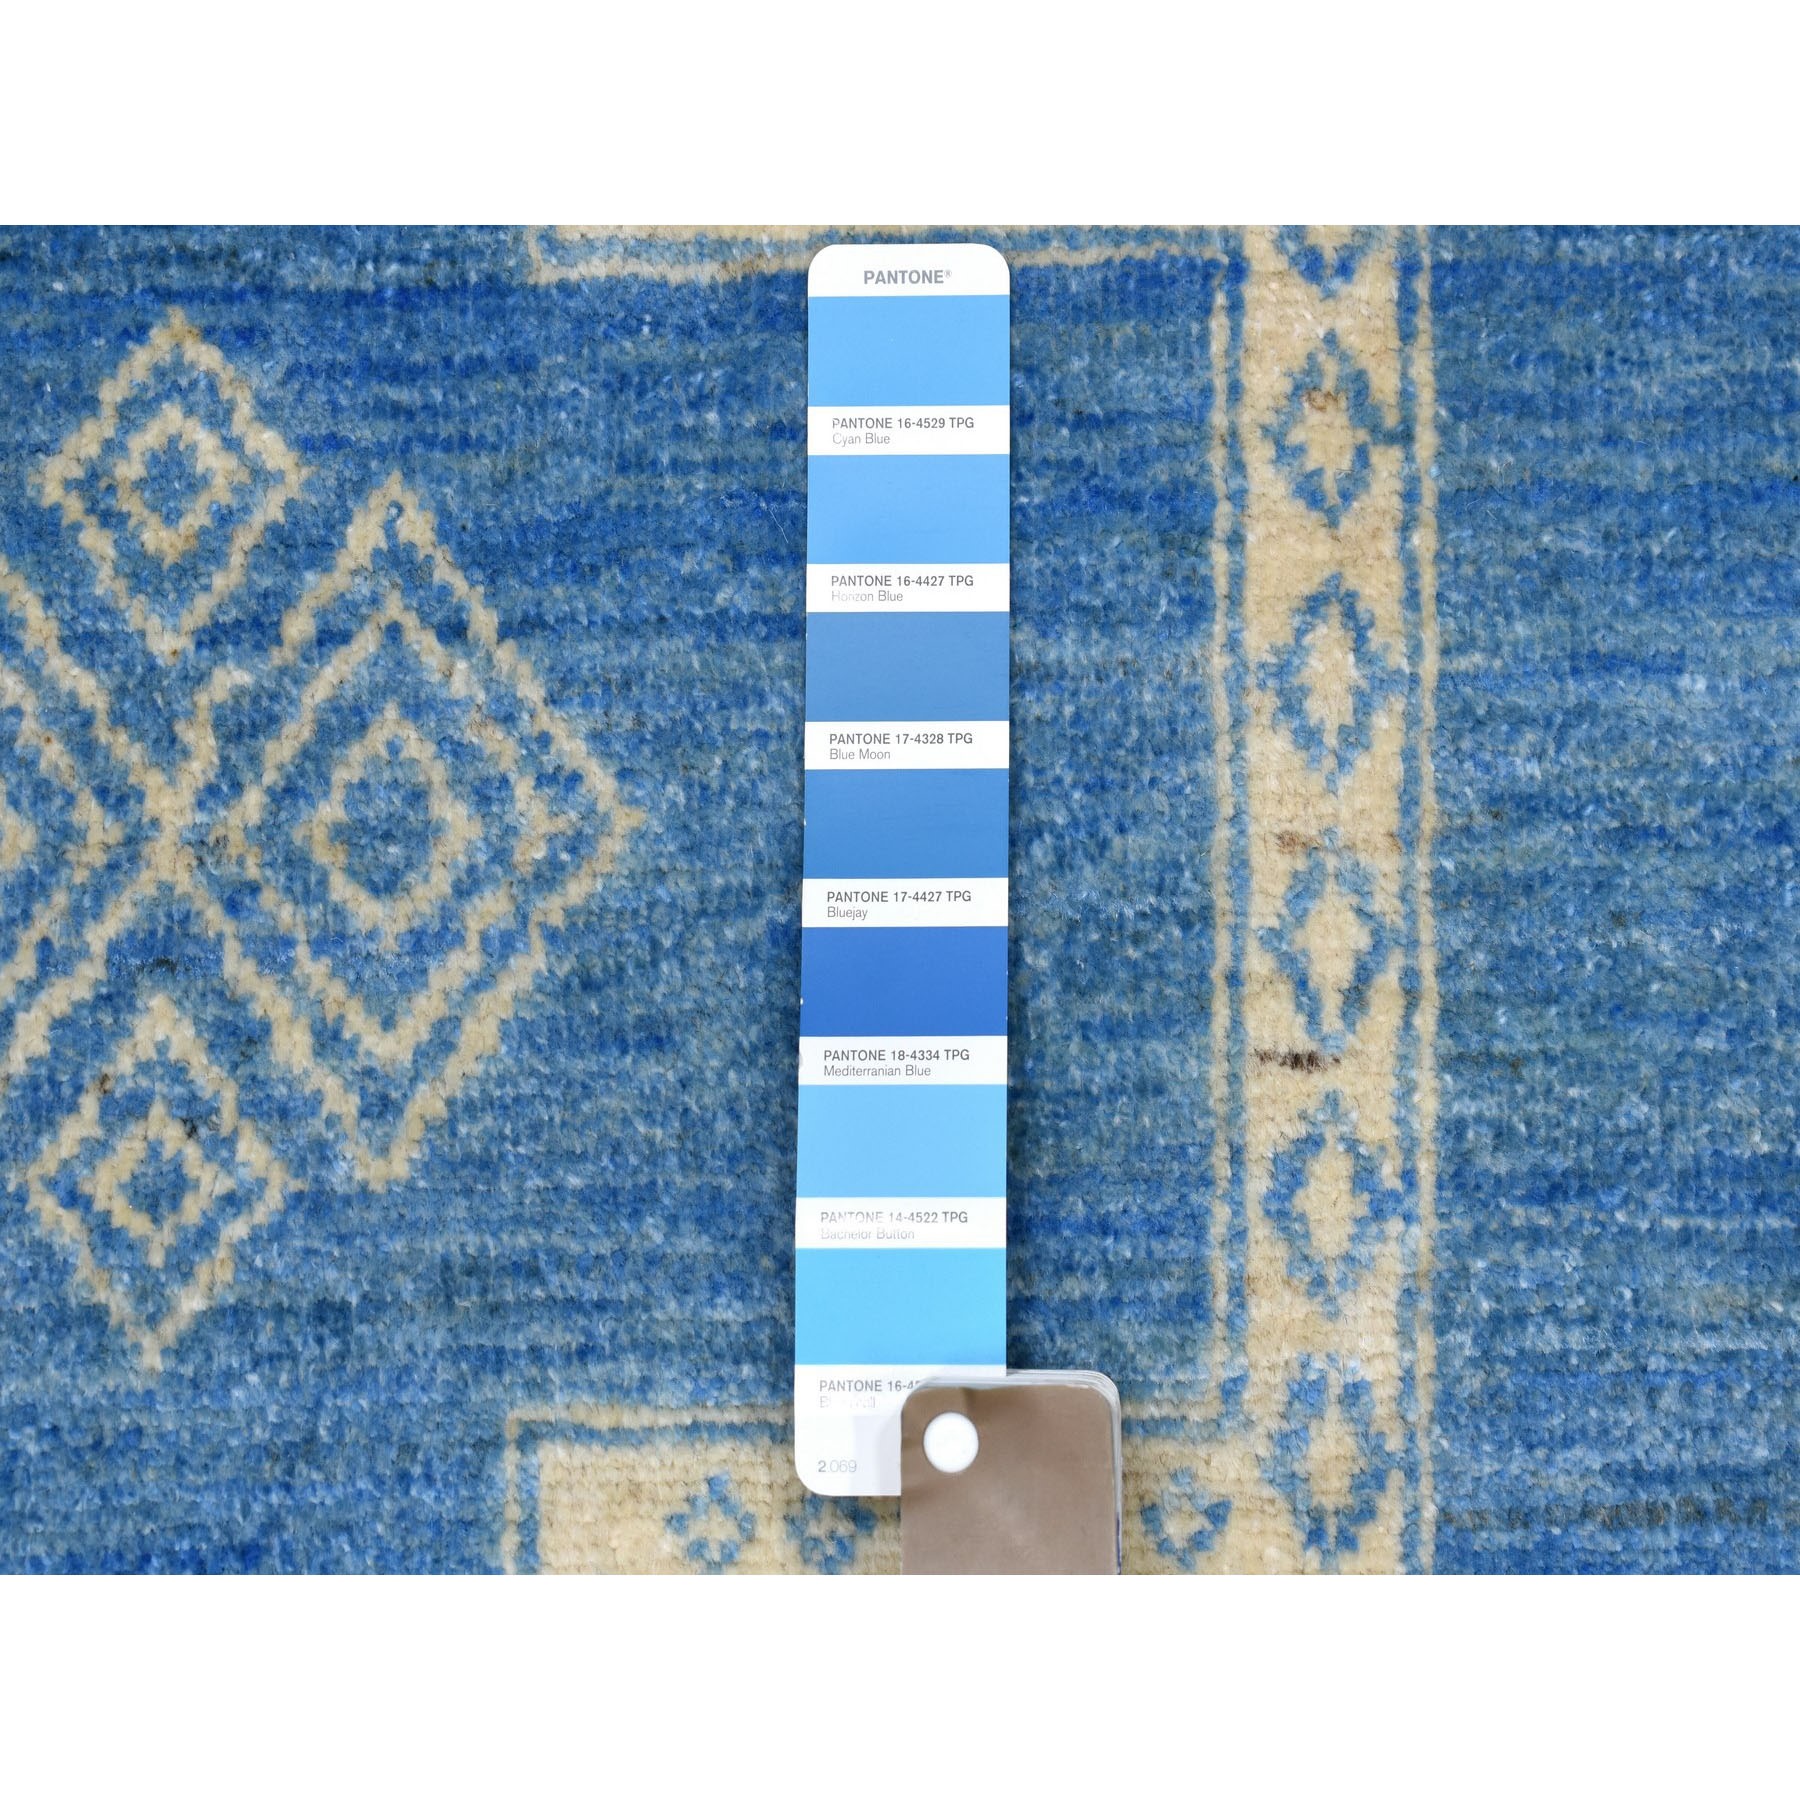 8-x10- Blue Hand Knotted Pure Wool Peshawar with Southwestern Motifs Oriental Rug 